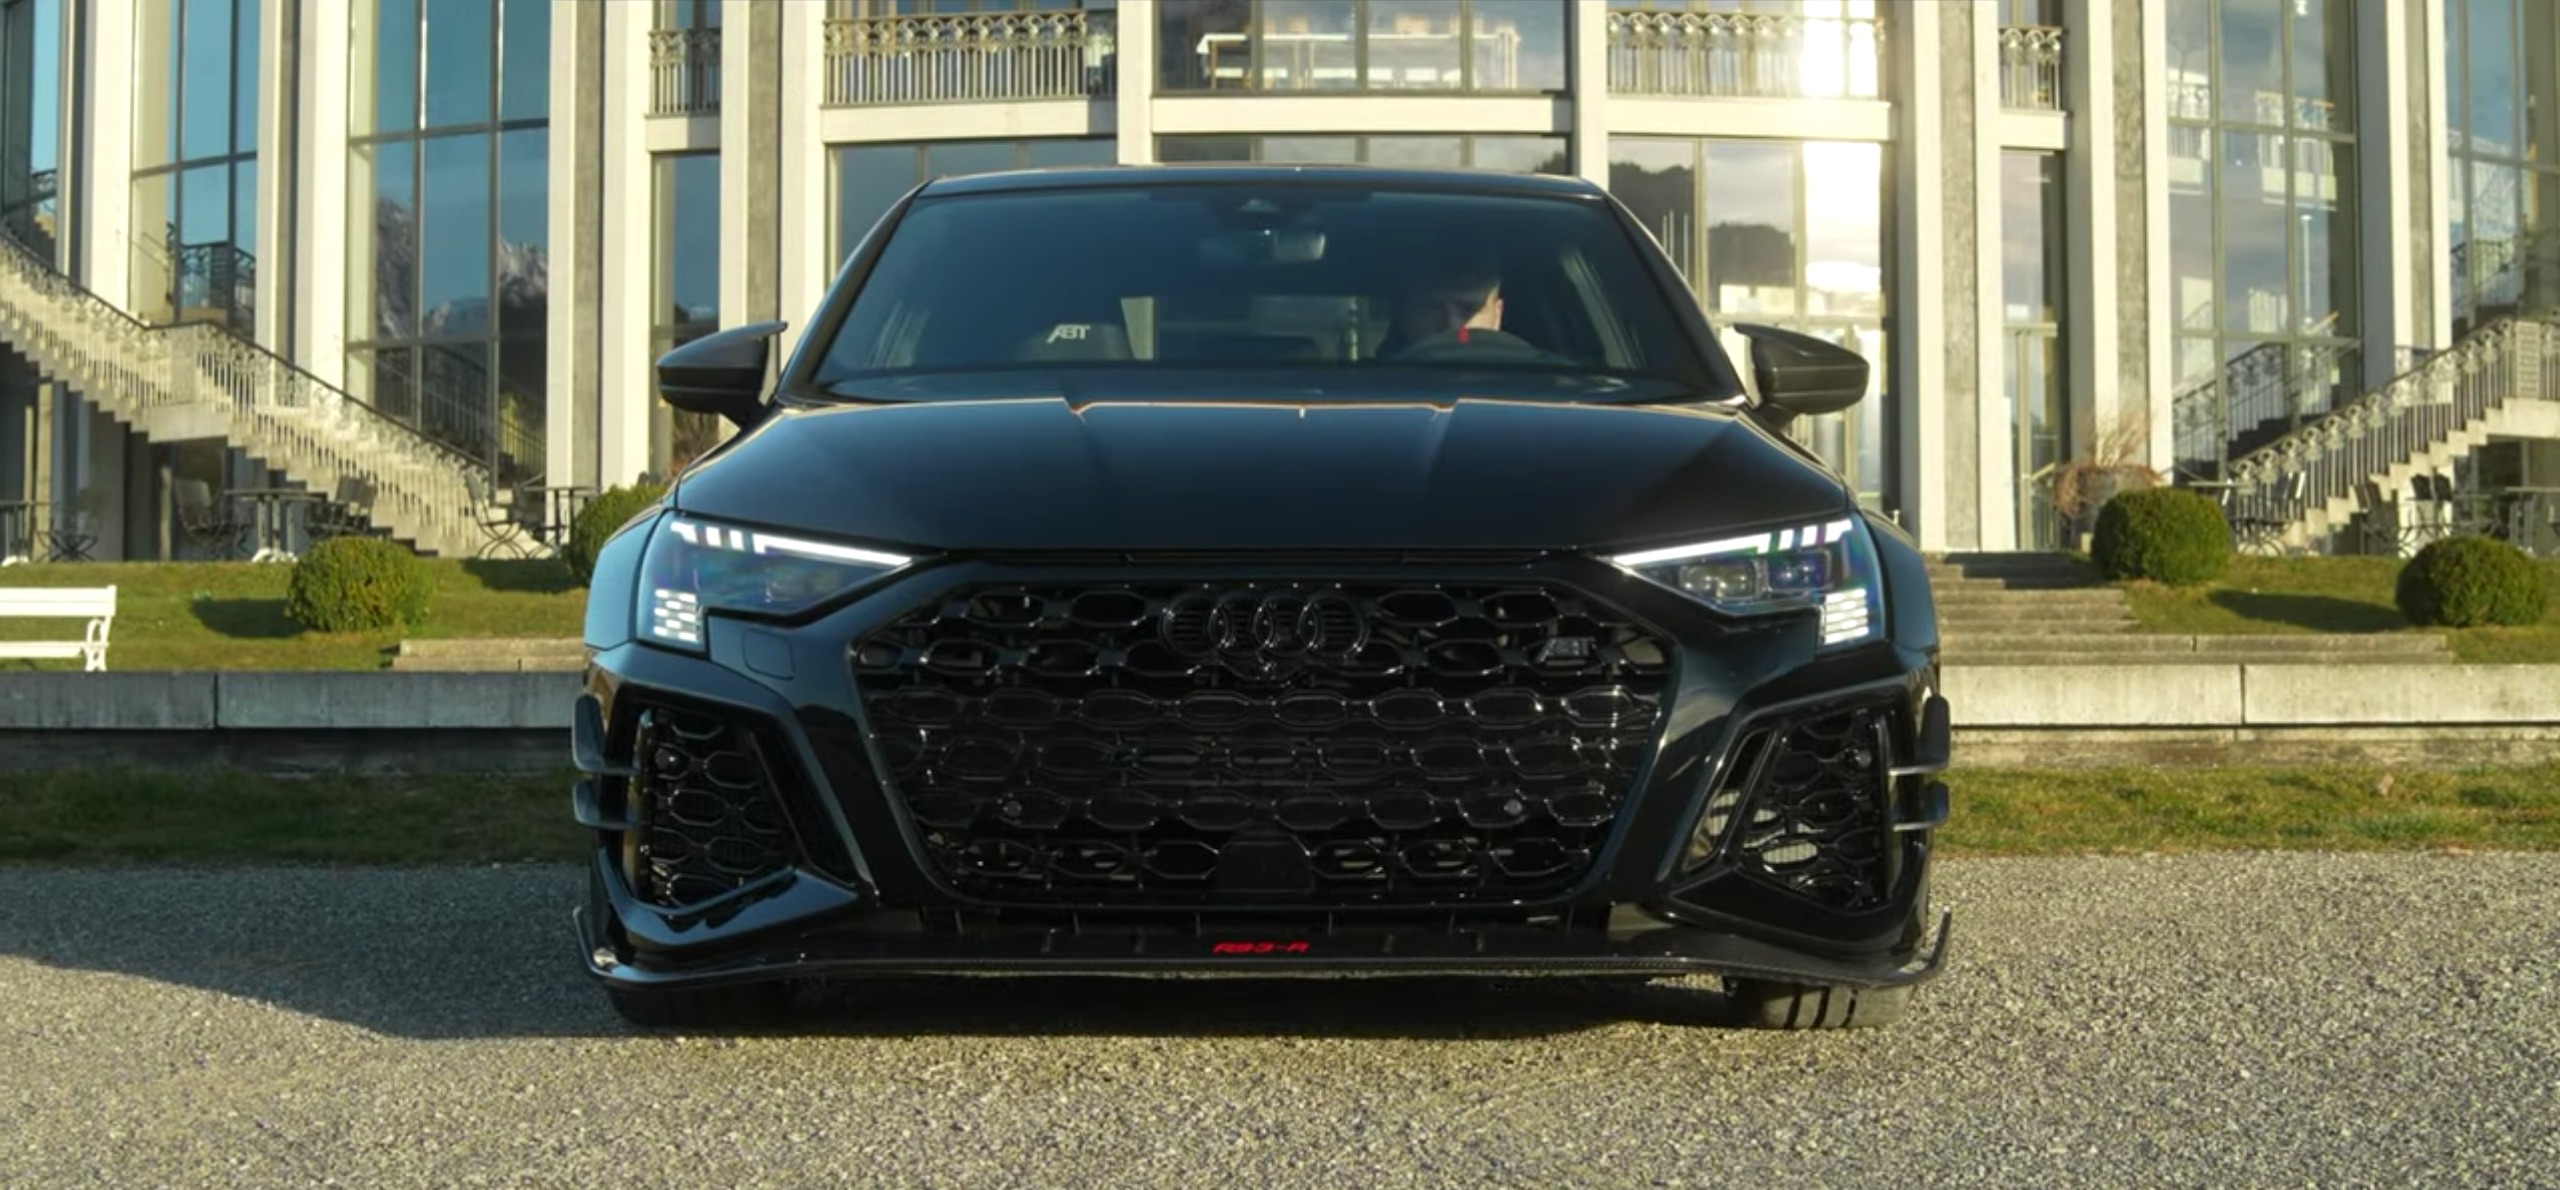 Nothing Friendly About This Darth Vader-Looking ABT 2023 Audi RS3